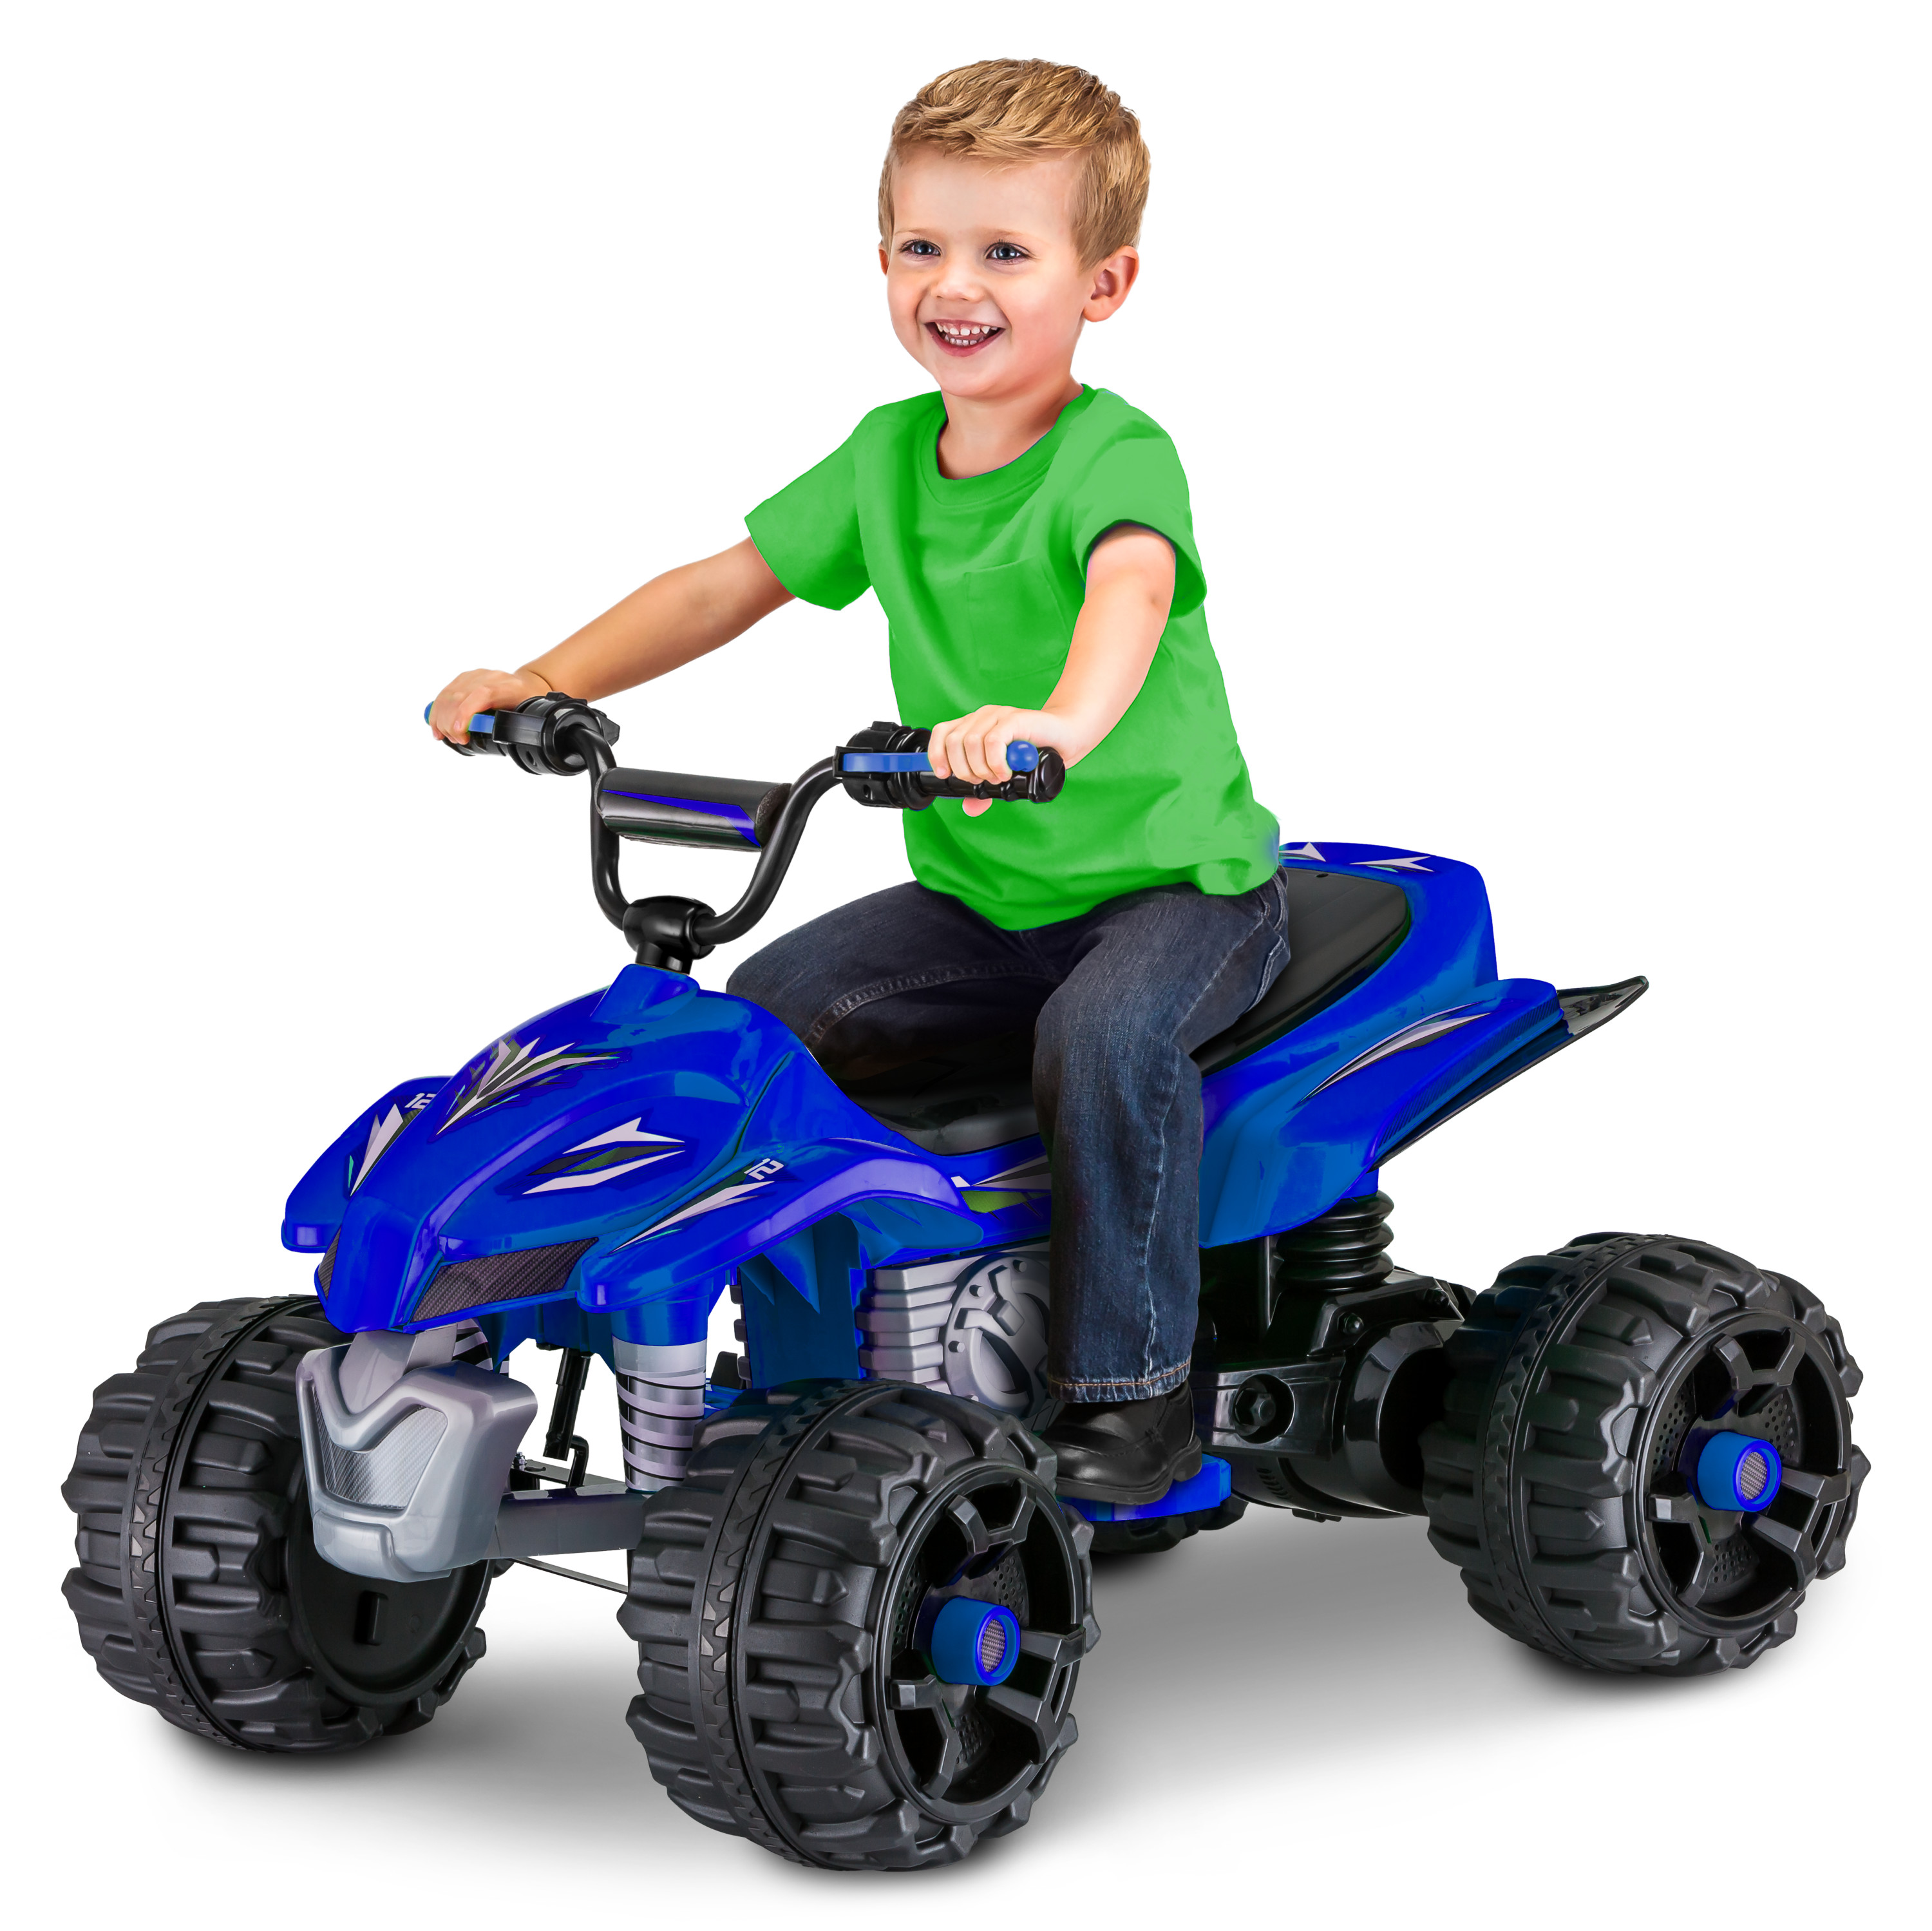 Sport ATV, 12-Volt Ride-On Toy by Kid Trax, ages 3+, blue - image 1 of 5